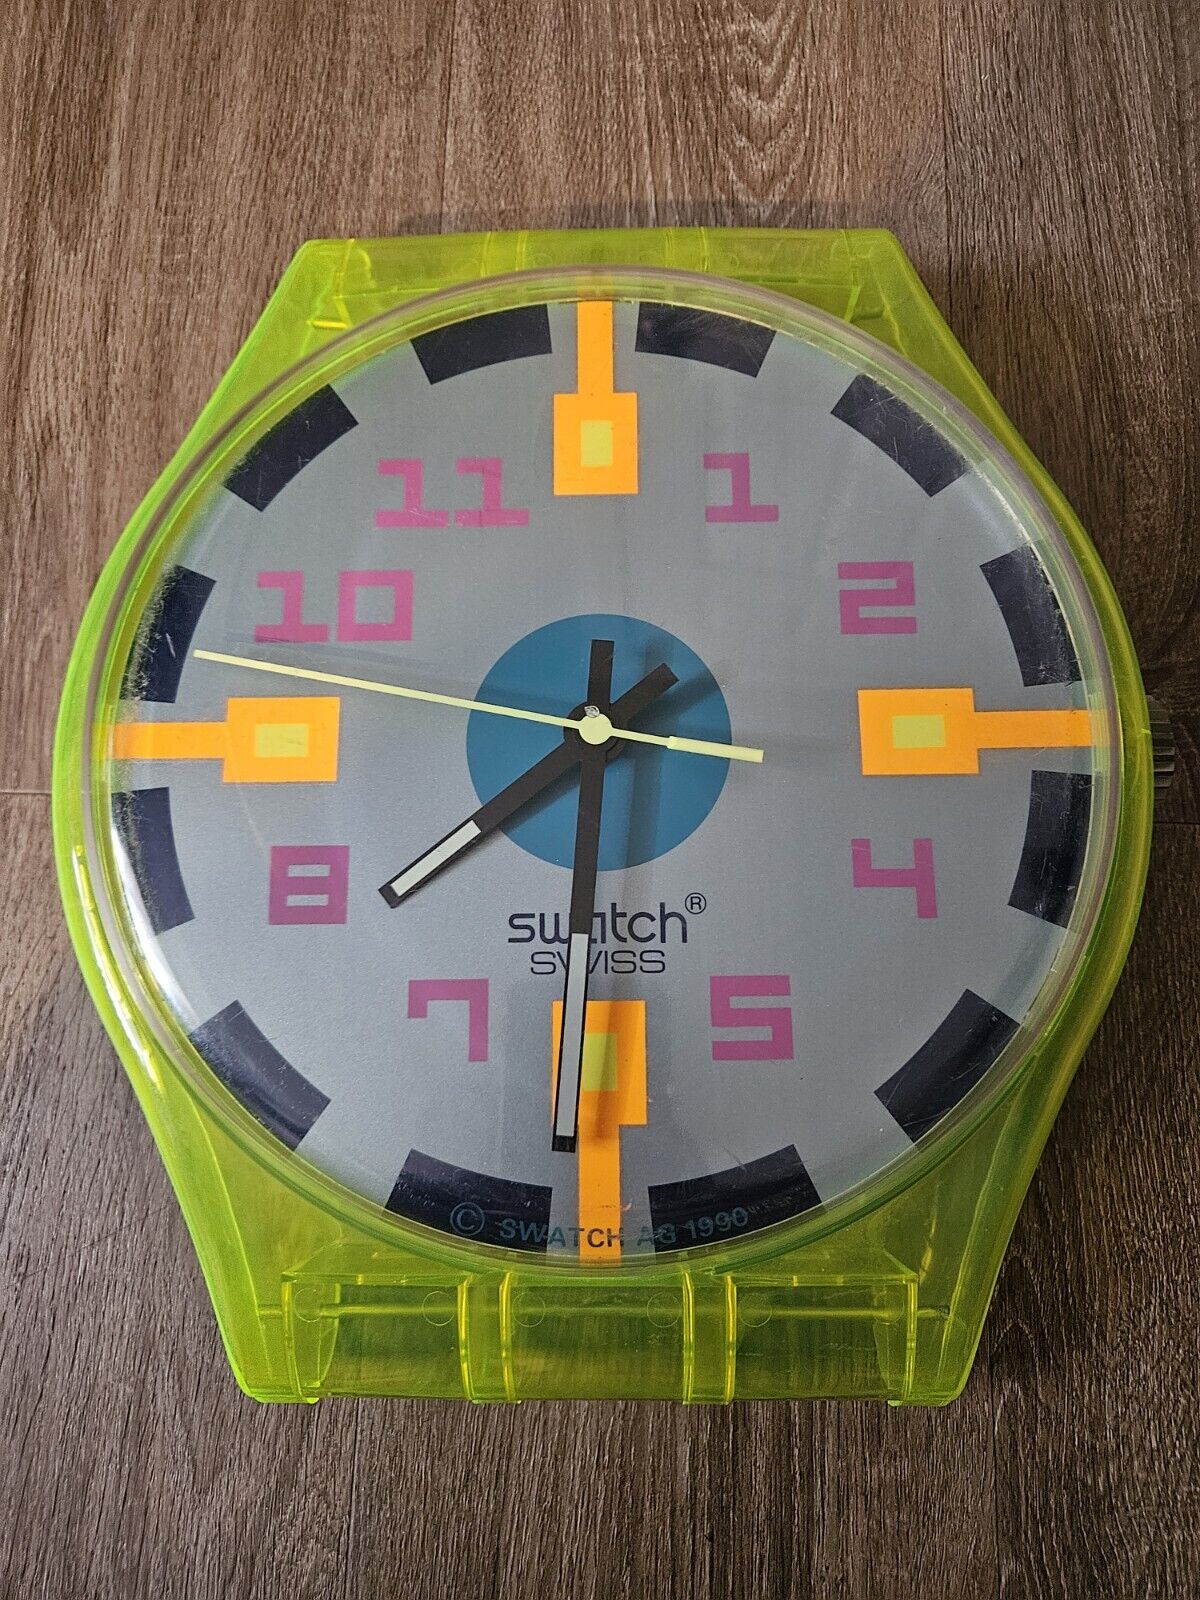 Vintage 1990 Swatch Swiss Lime Florescent Green Wall Clock 🔥🔥 Tested & WORKS